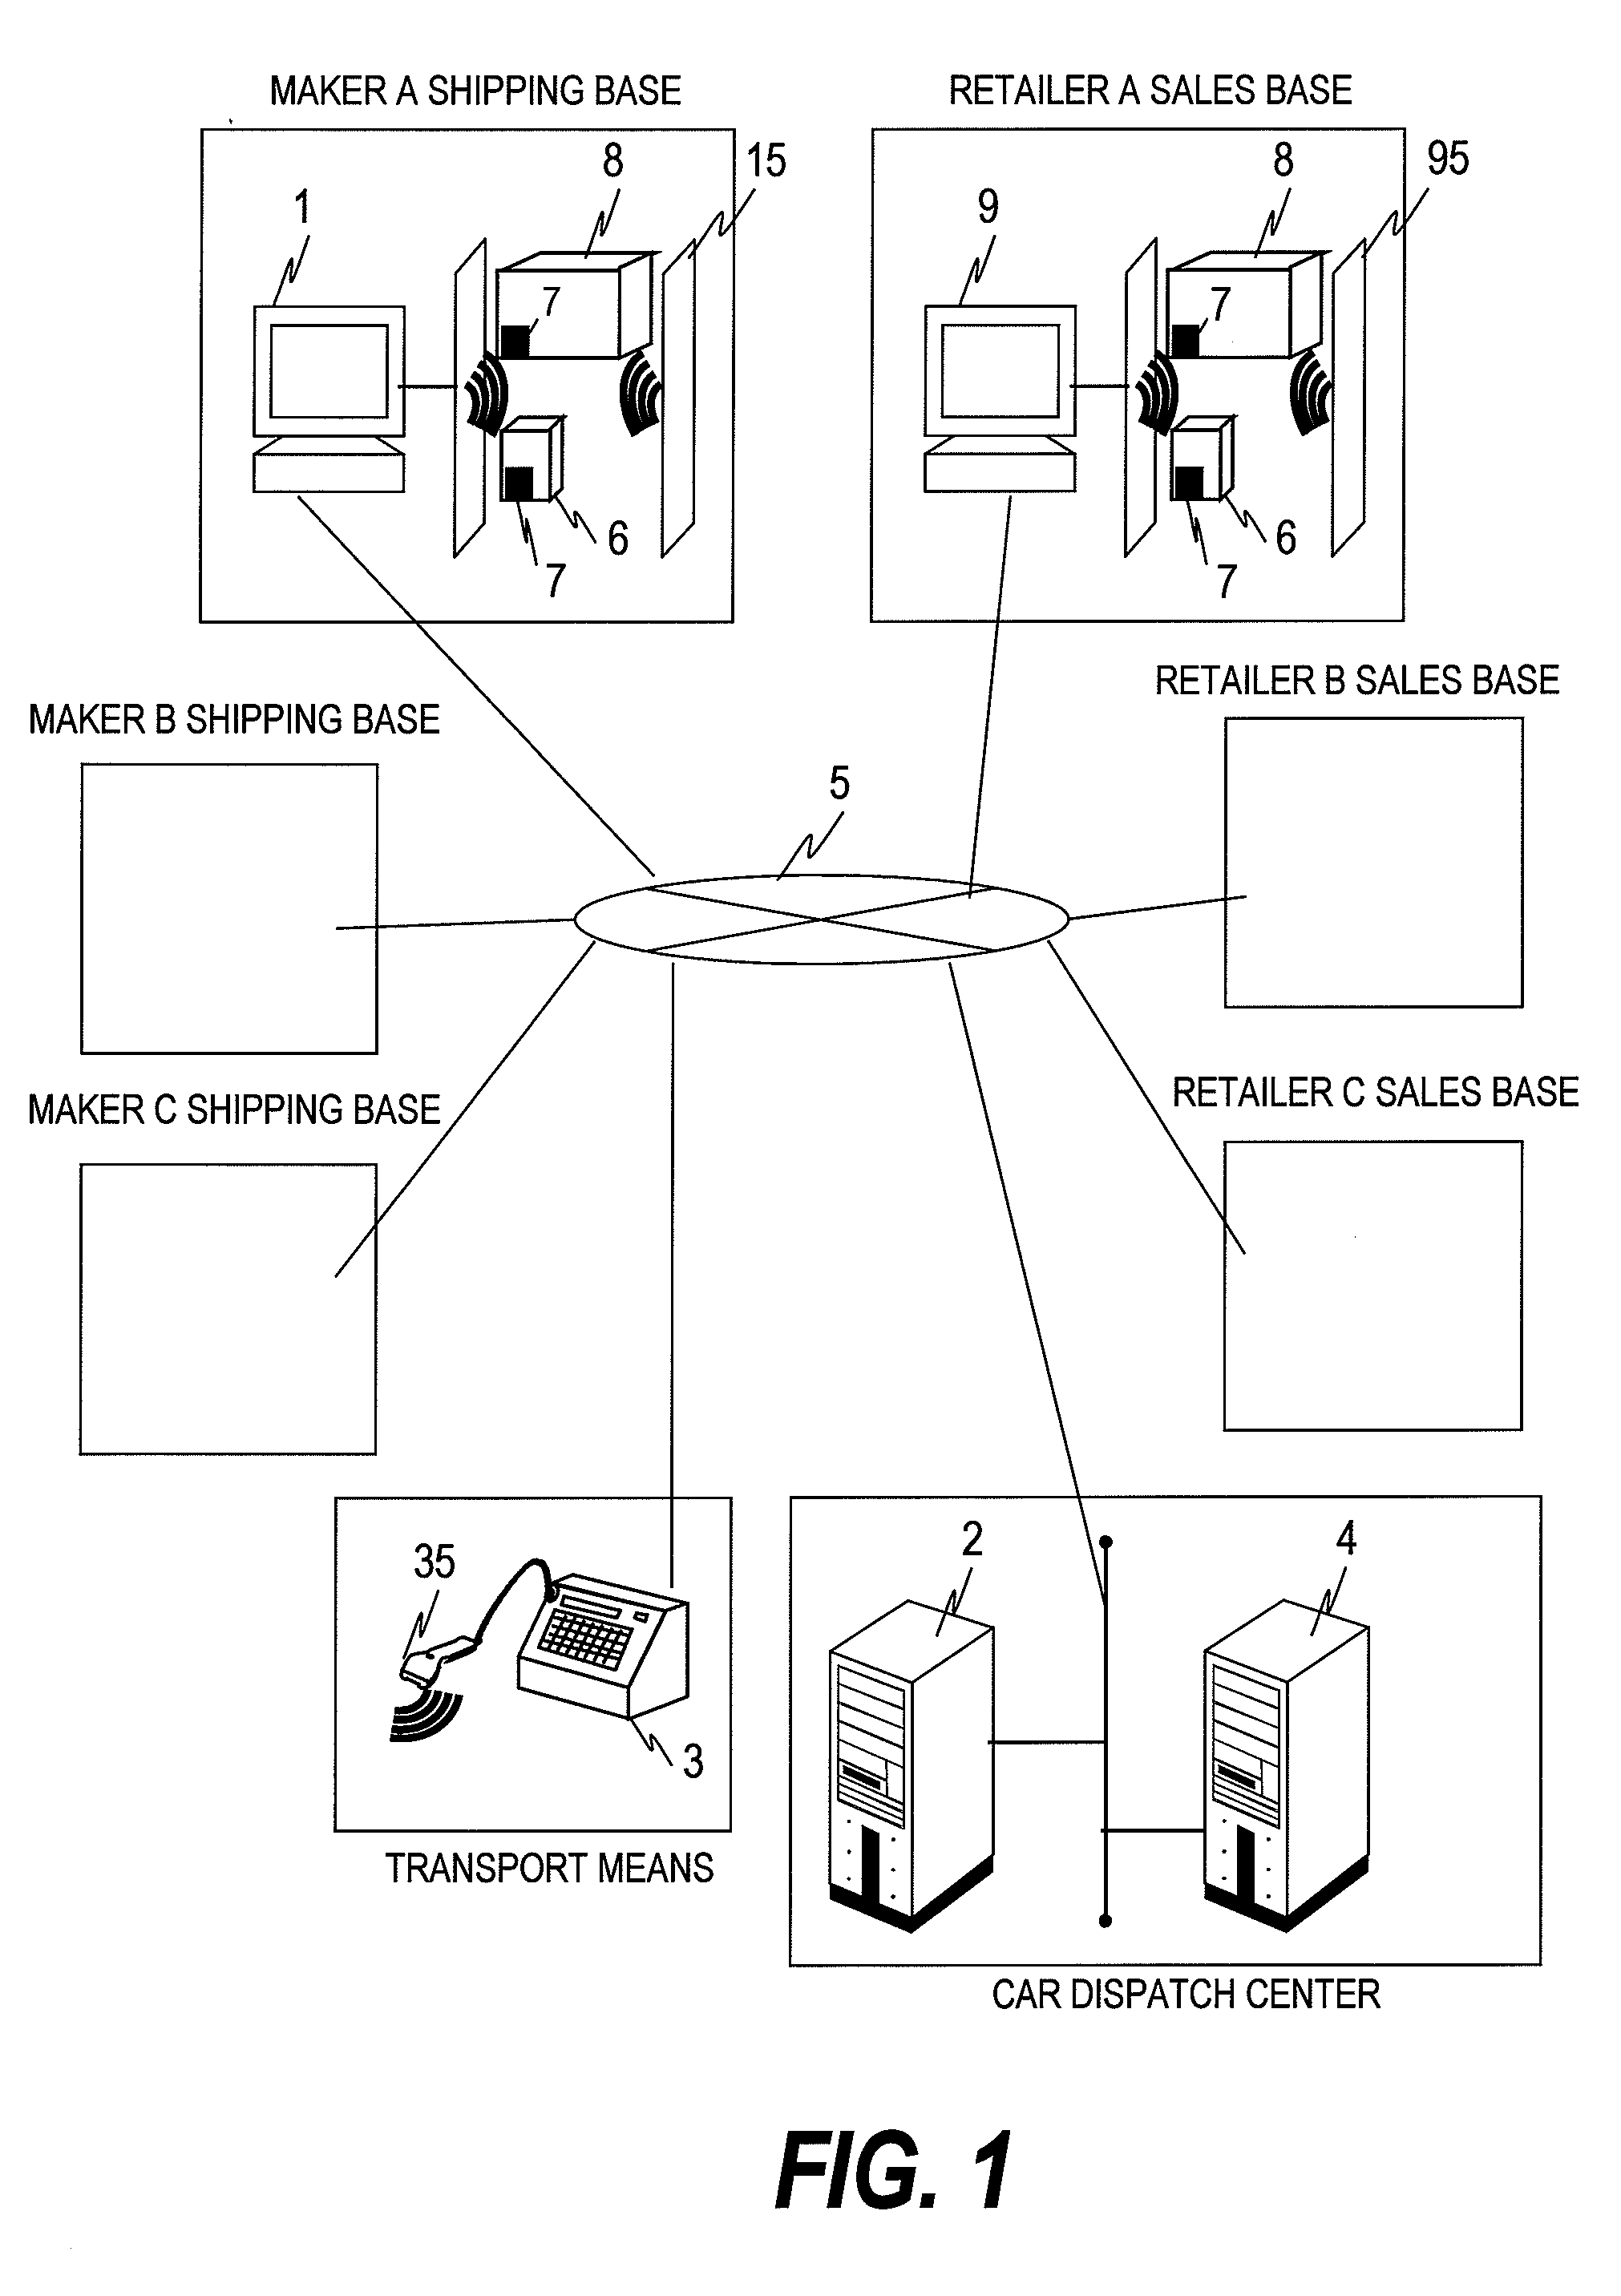 Computer system for a commodities delivery system